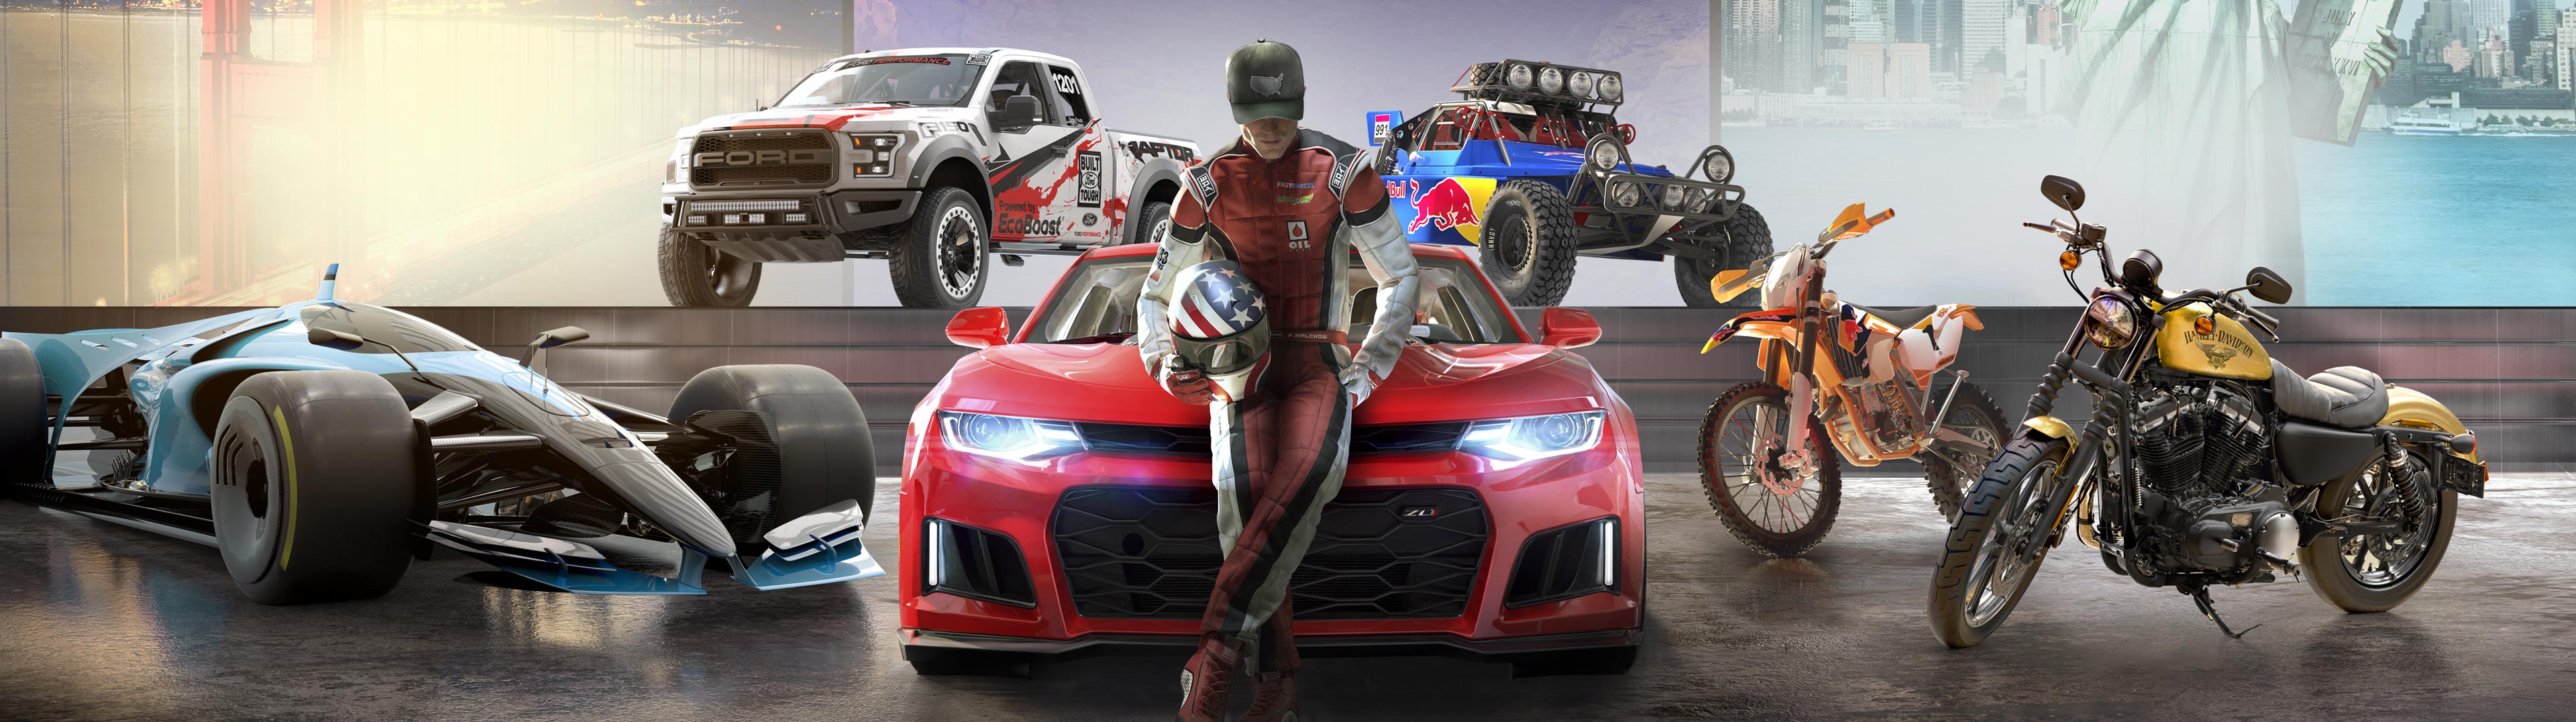 The Crew 2 Ubisoft Connect for PC - Buy now